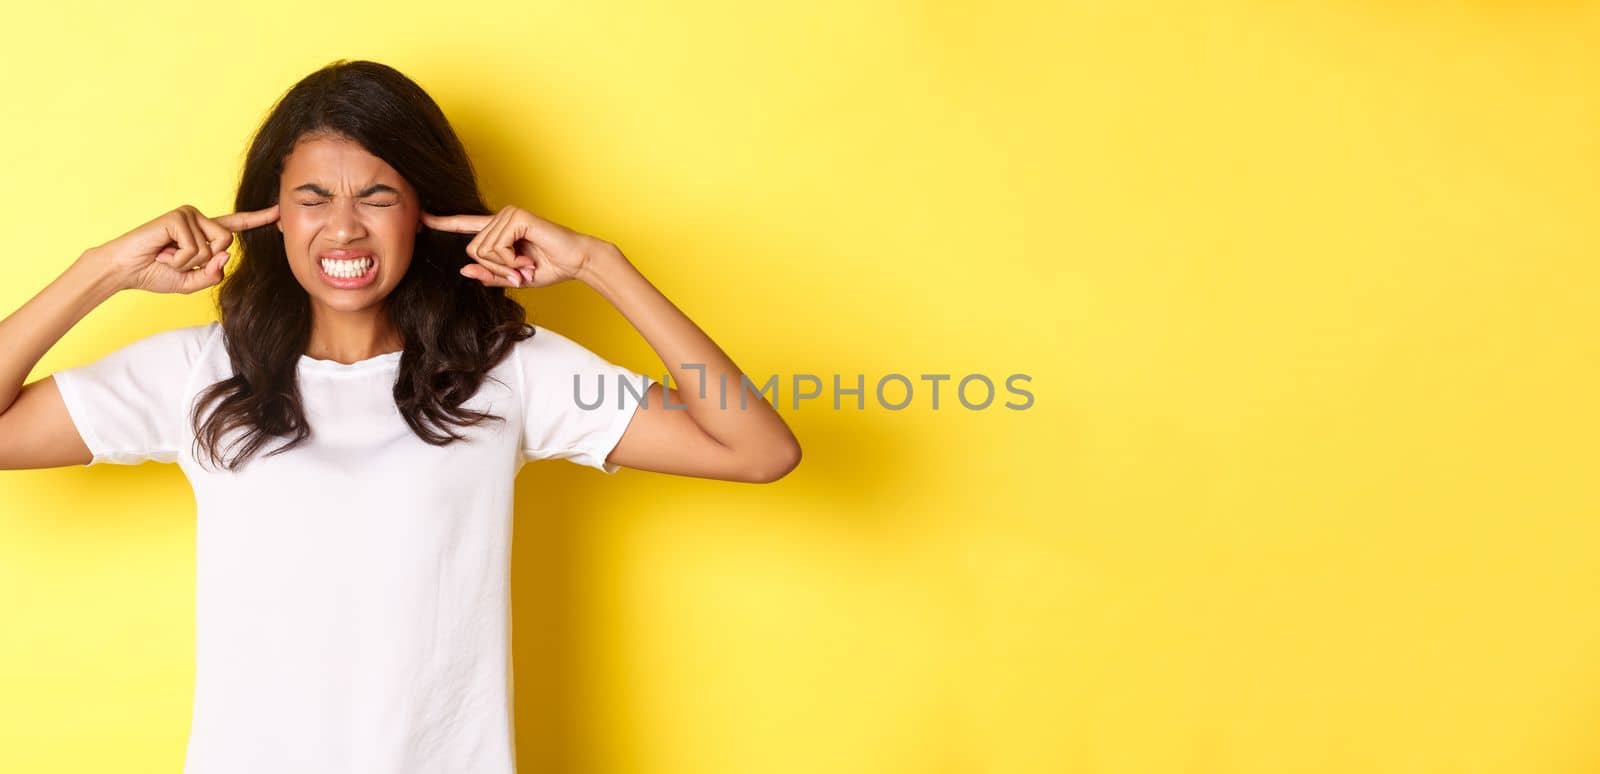 Portrait of annoyed and pissed-off african-american girl, shut her ears and grimacing from loud awful noise, being disturbed by something loud, standing over yellow background.